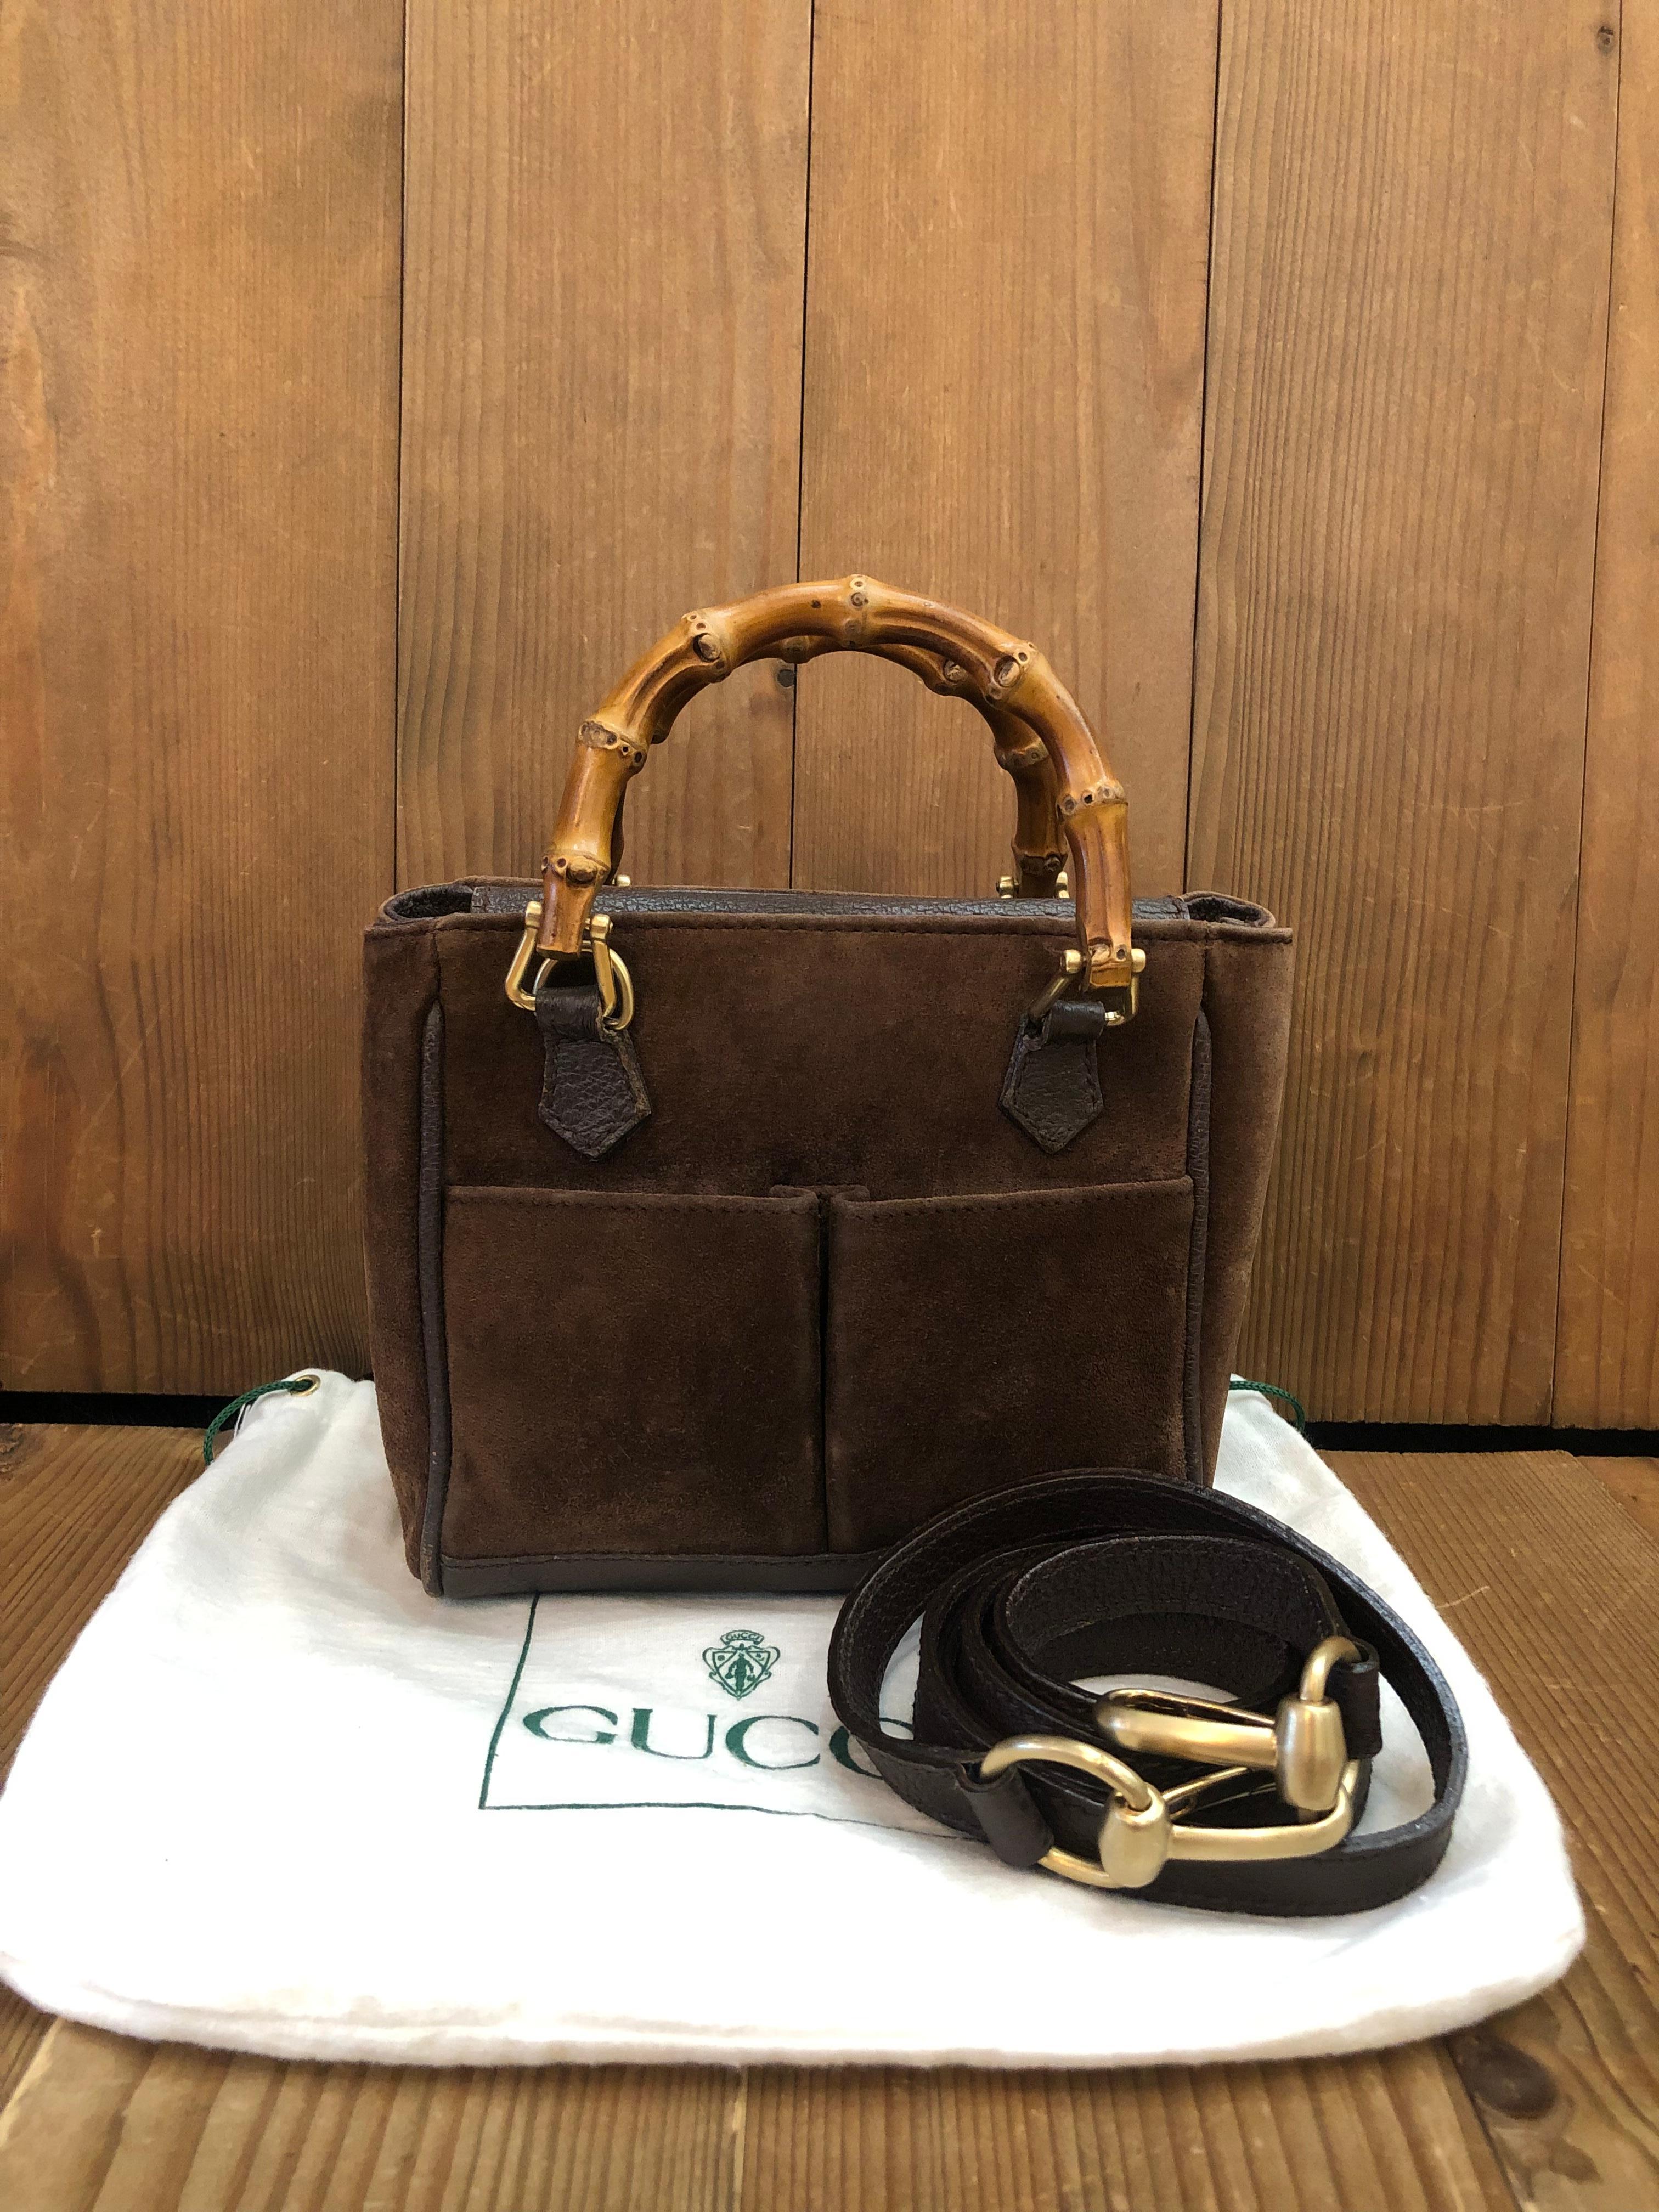 This 1990s vintage GUCCI mini 2-way bamboo crossbody bag is crafted of pigskins and nubuck leather in chocolate brown featuring matt gold toned hardware and bamboo handles. The front of this bag features two open pockets lined with diamanté